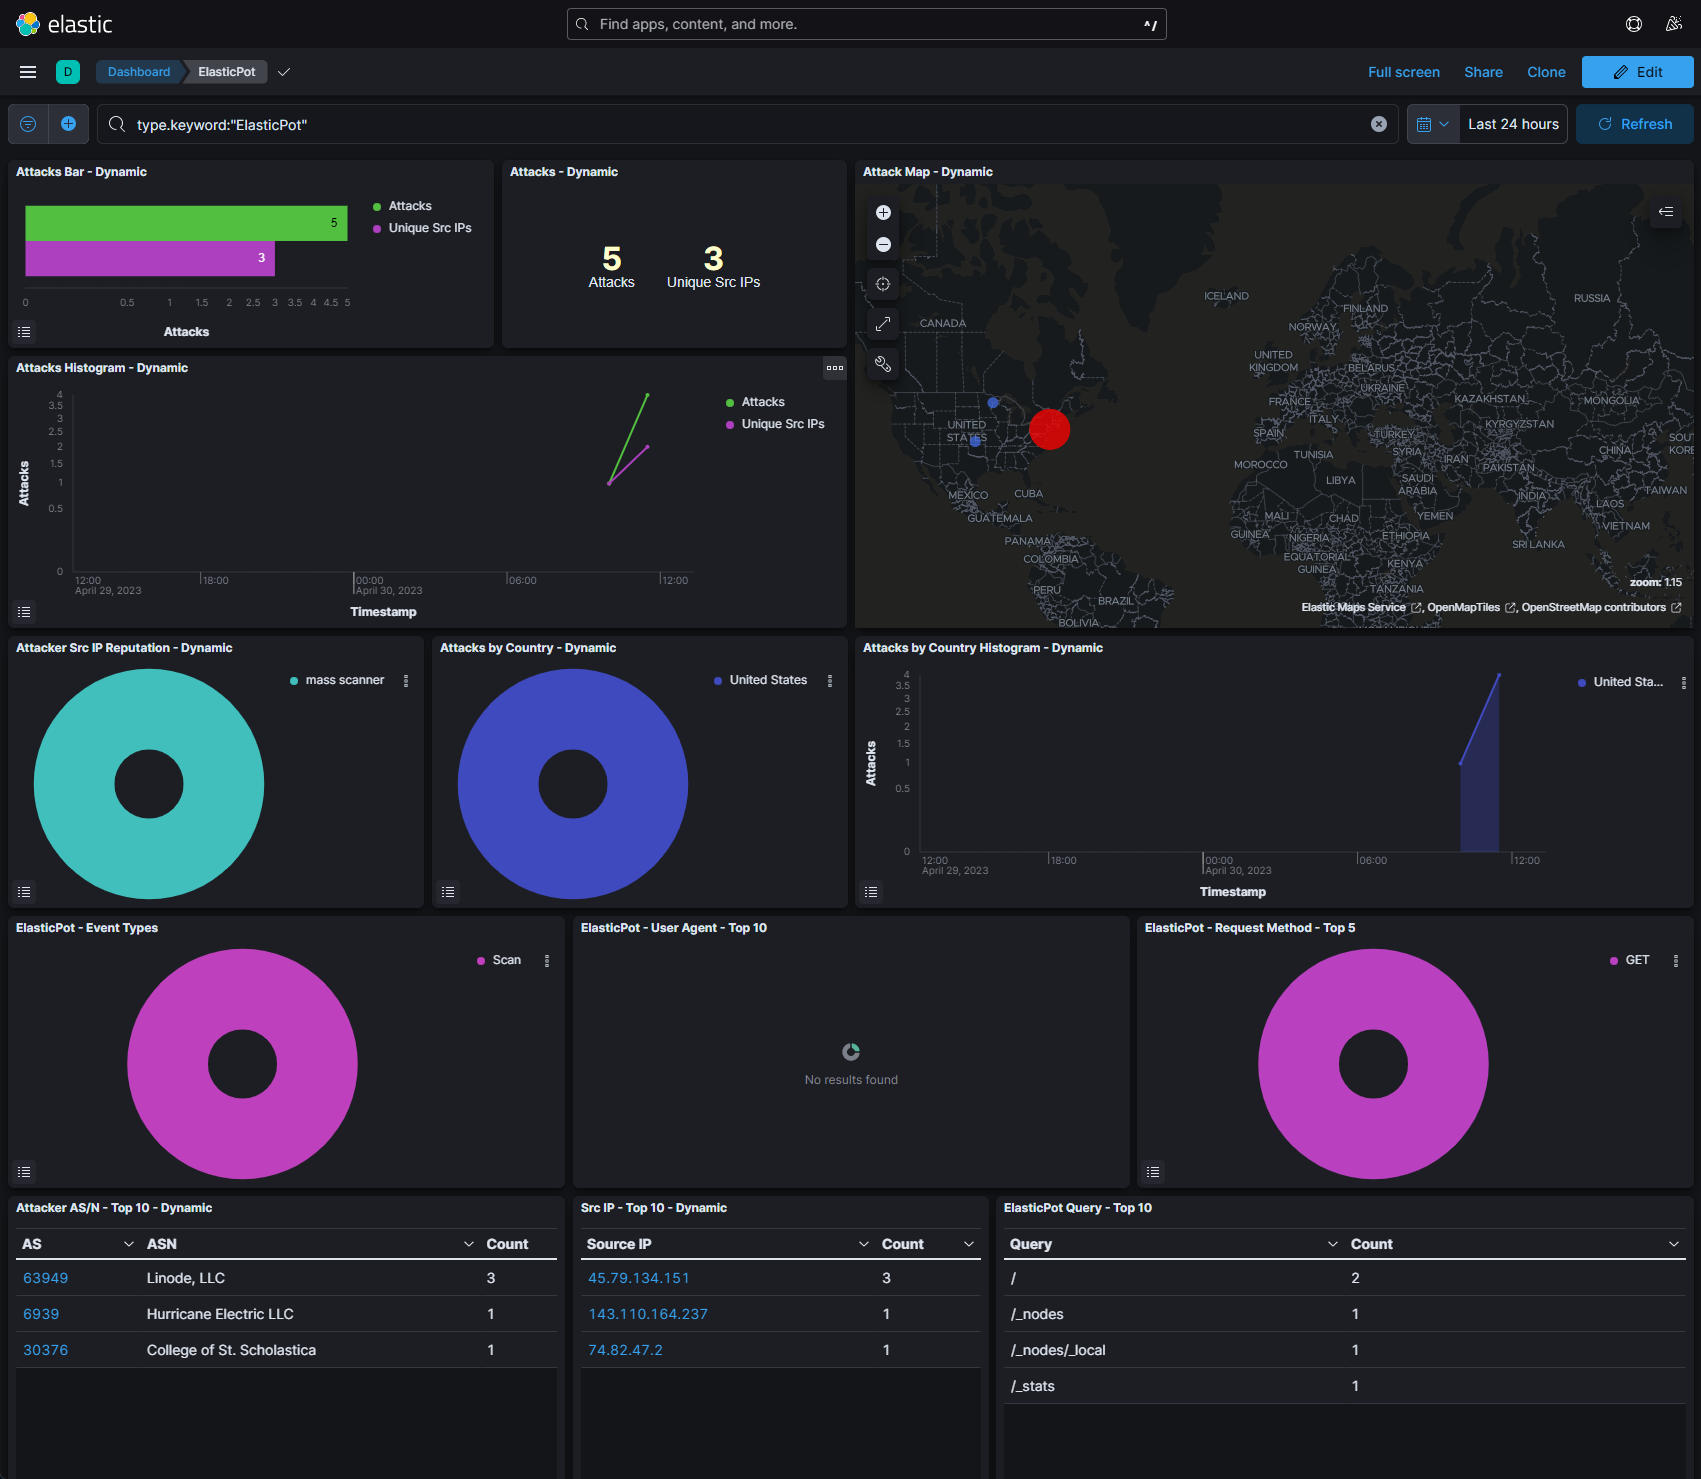 t-pot-kibana-elasticpot-dashboard T-Pot Honeynet: How to Set Up and Monitor Your Own Network of Decoys